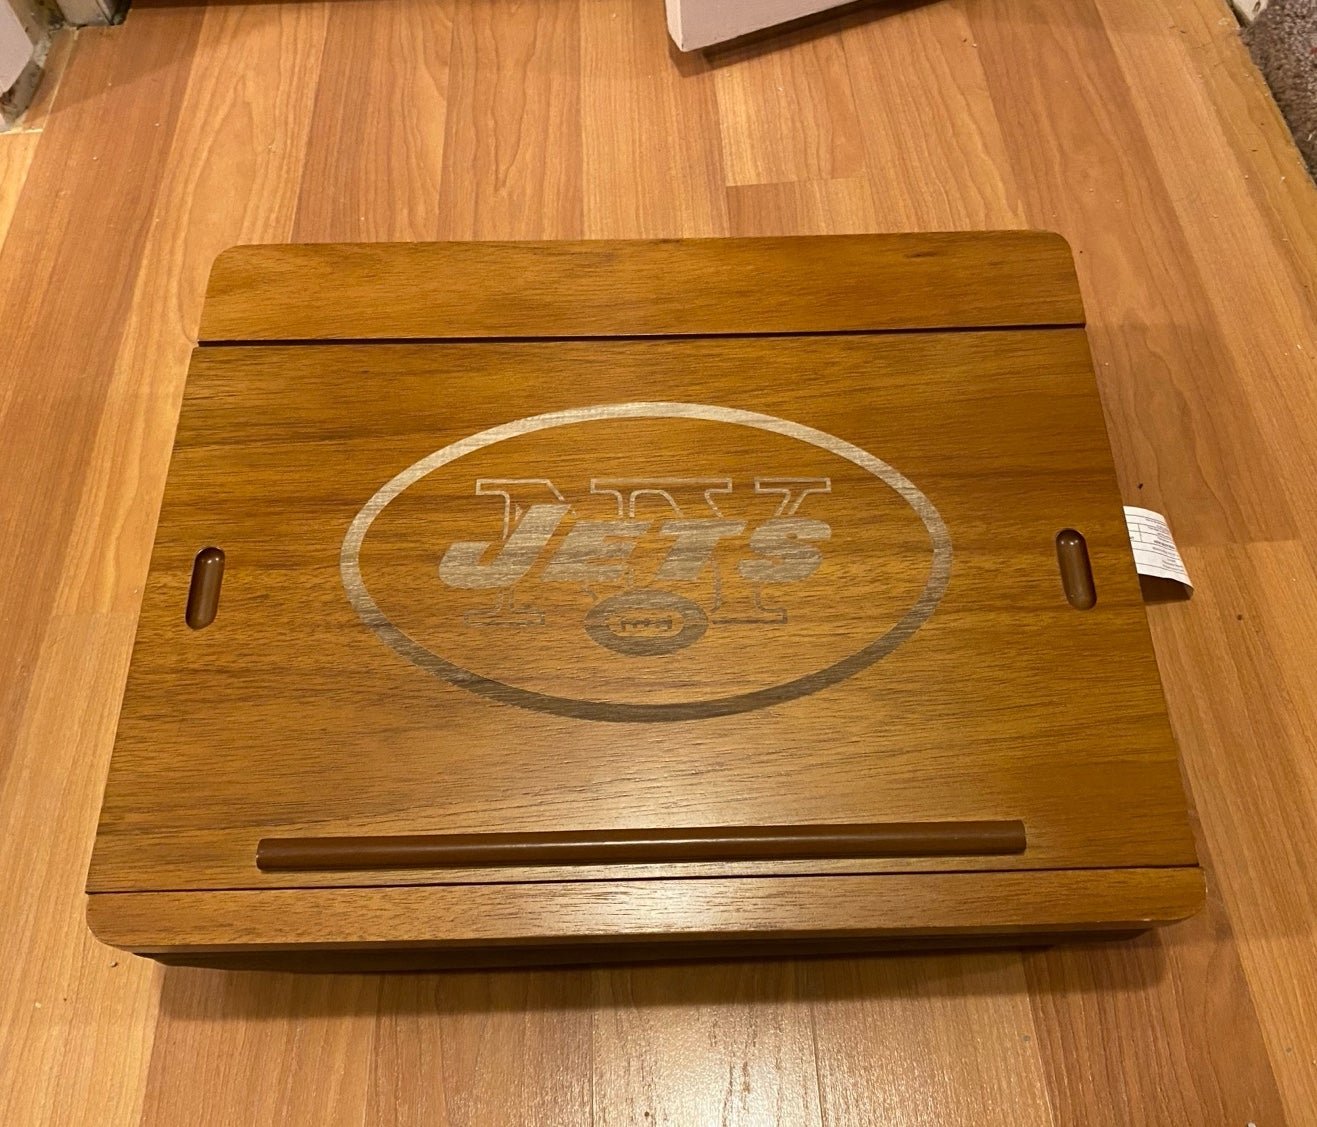 Pottery Barn Wooden Leather Teen NFL Jets Football Supe